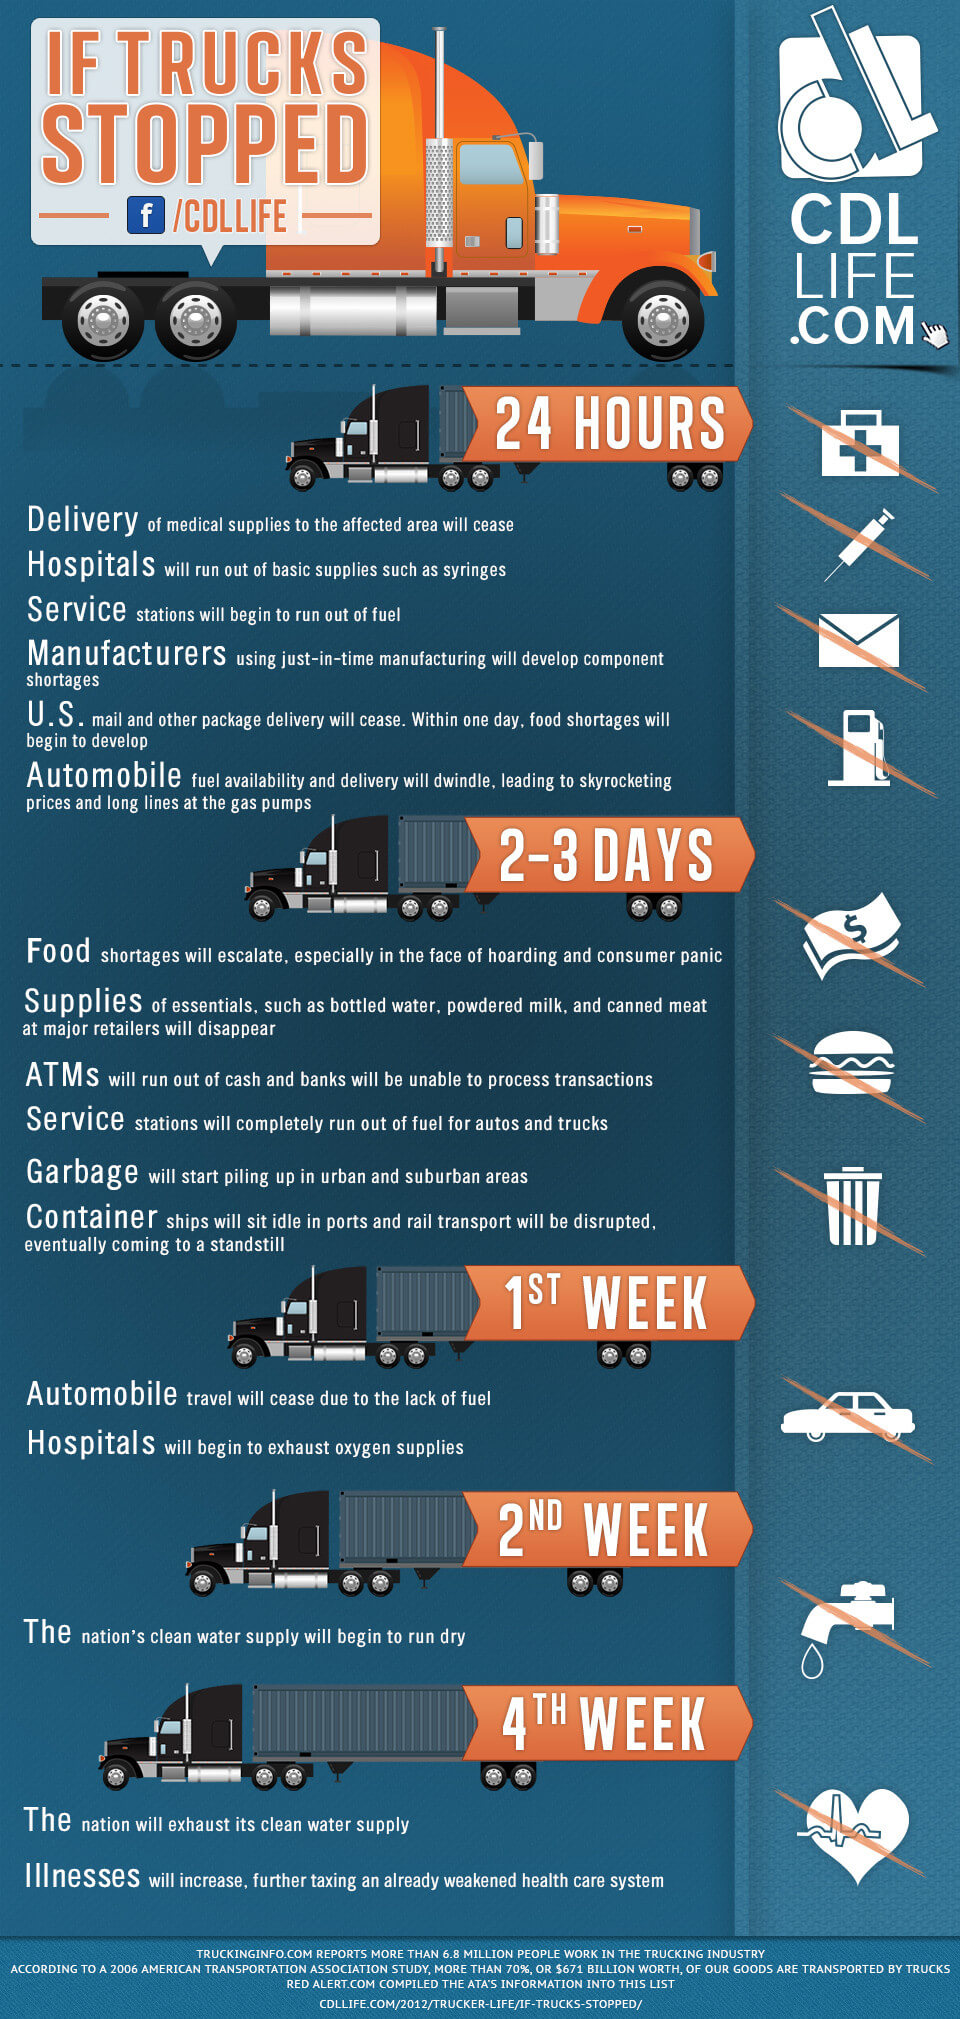 Nine Essential Facts About the Lifestyle of a Truck Driver – AJR